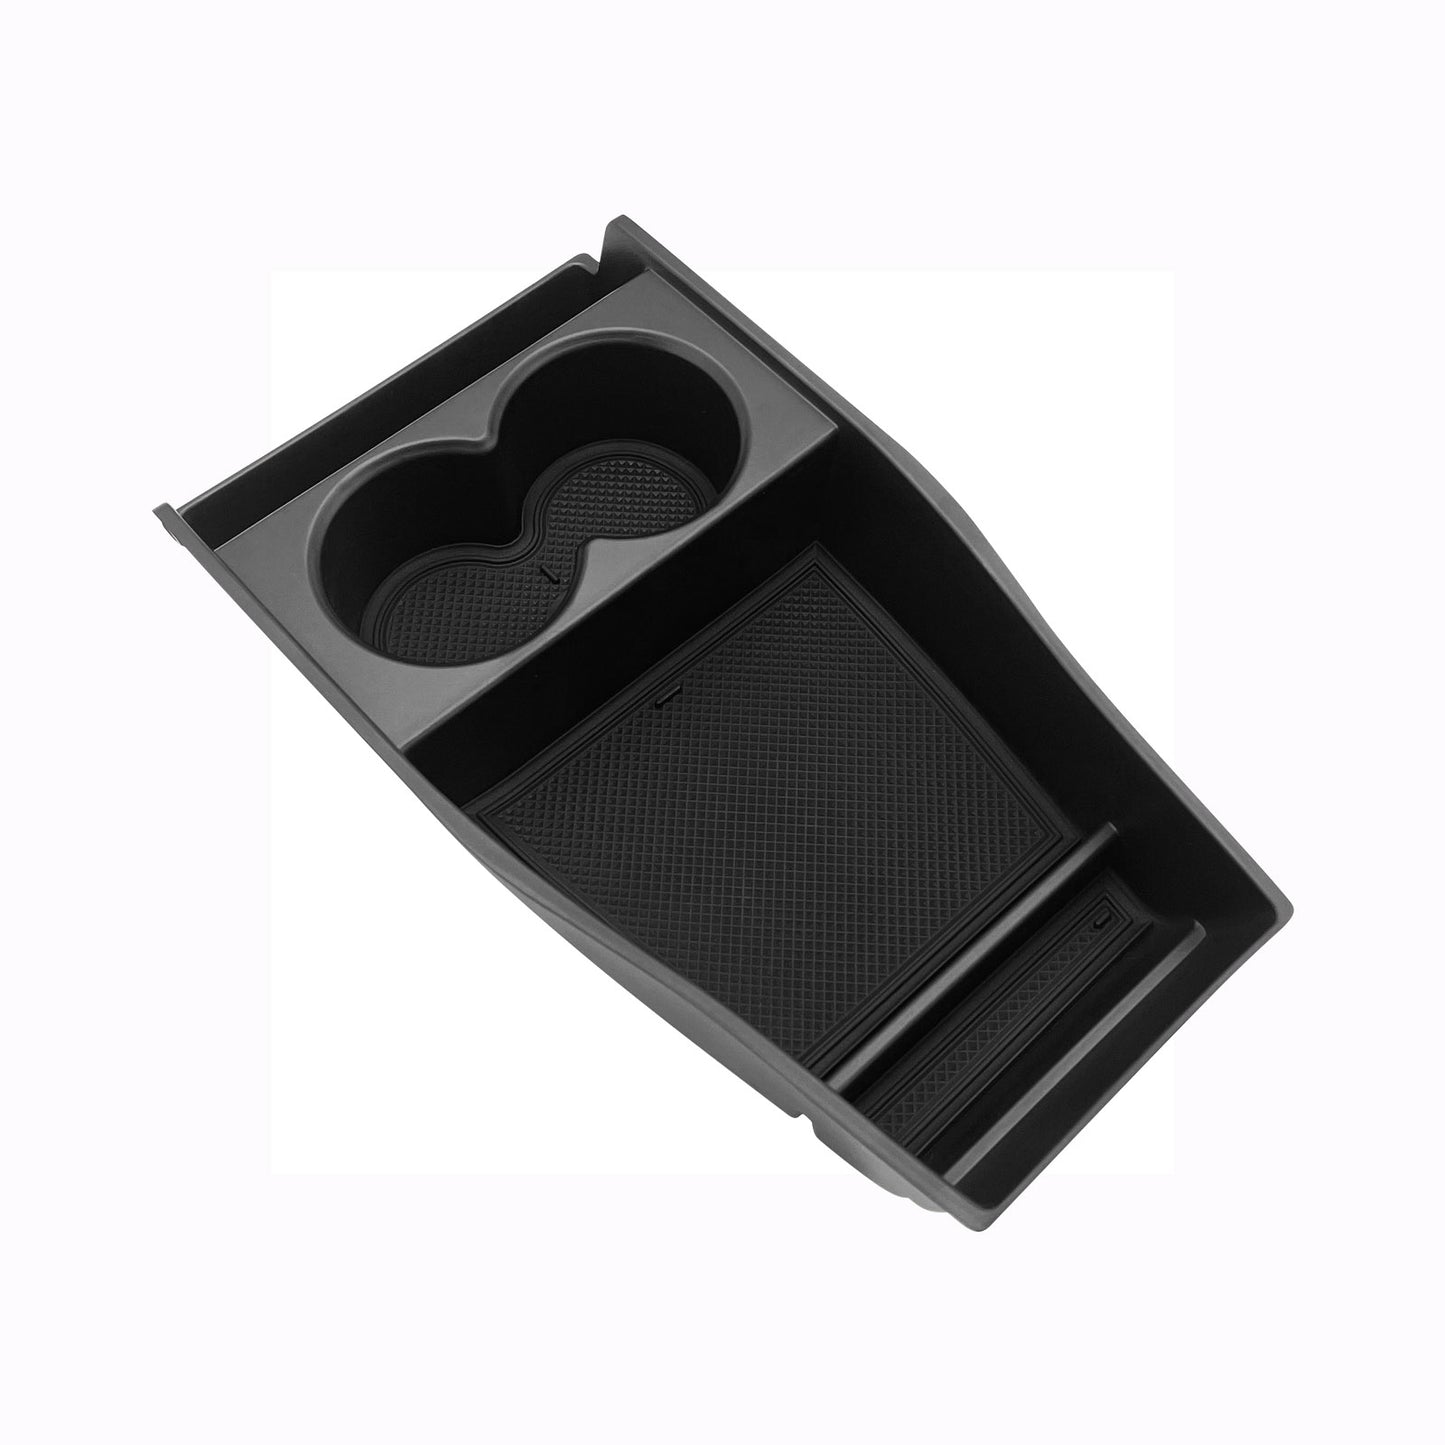 Ioniq5 Lower Center Console Organizer Tray Storage Box (Lower Tray-cup holder style) from BestEvMod